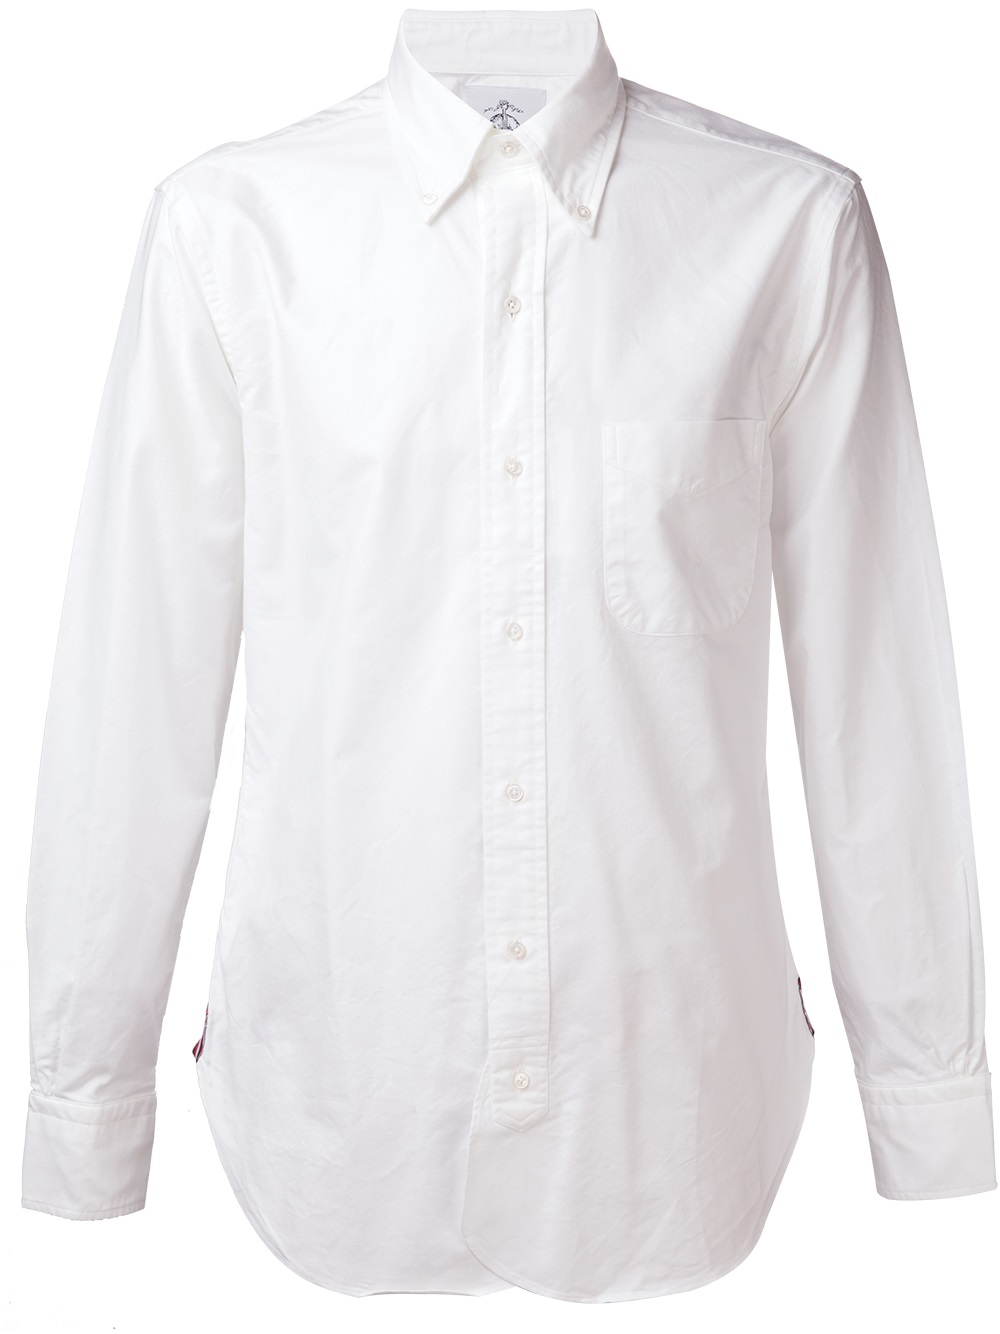 brooks brothers white oxford shirt